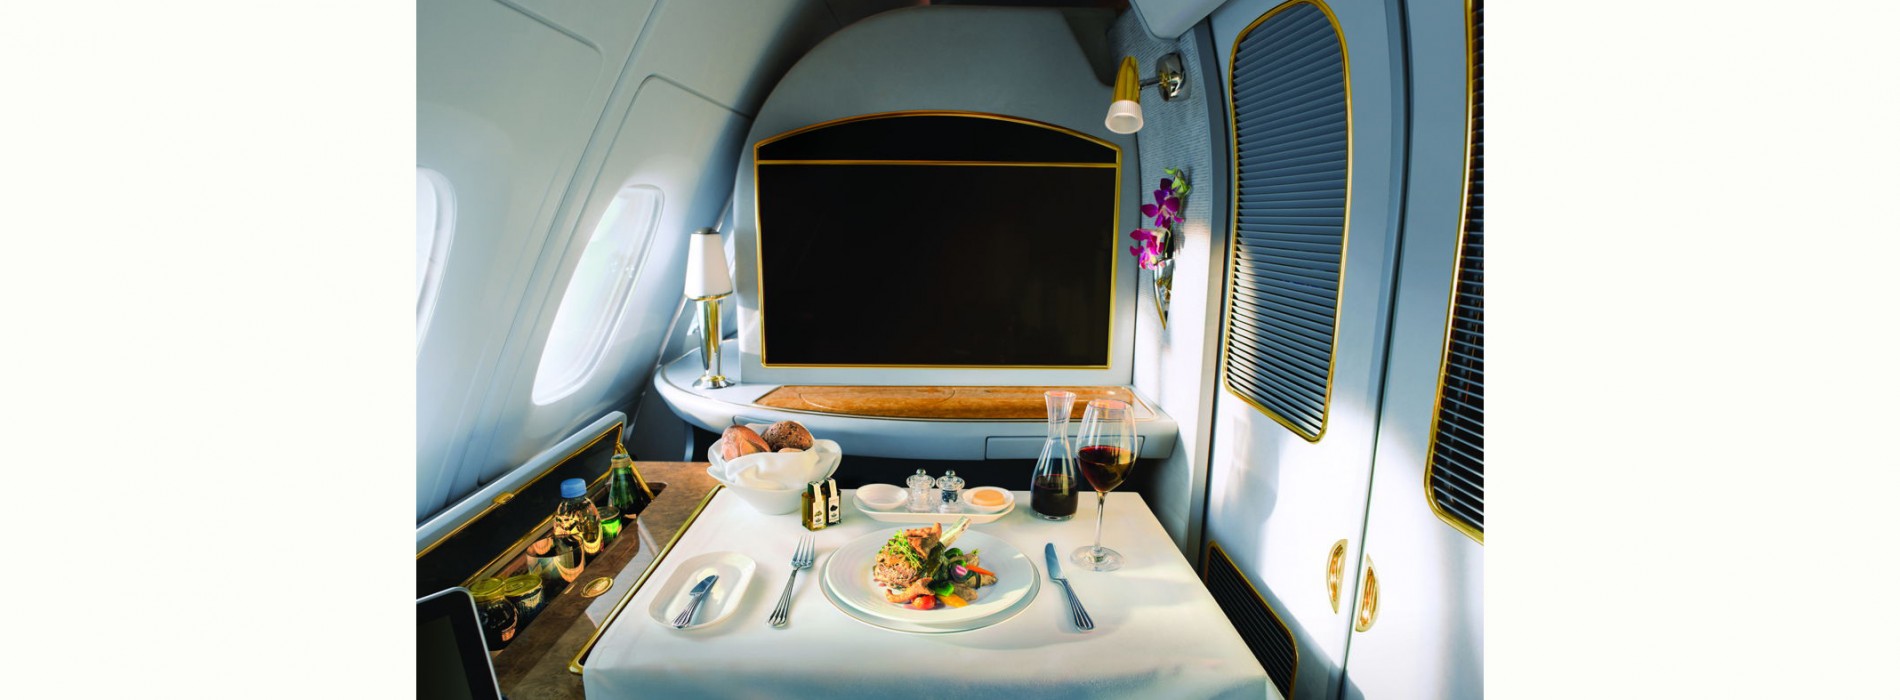 Emirates launches exclusive Food and Wine channels for inflight entertainment system